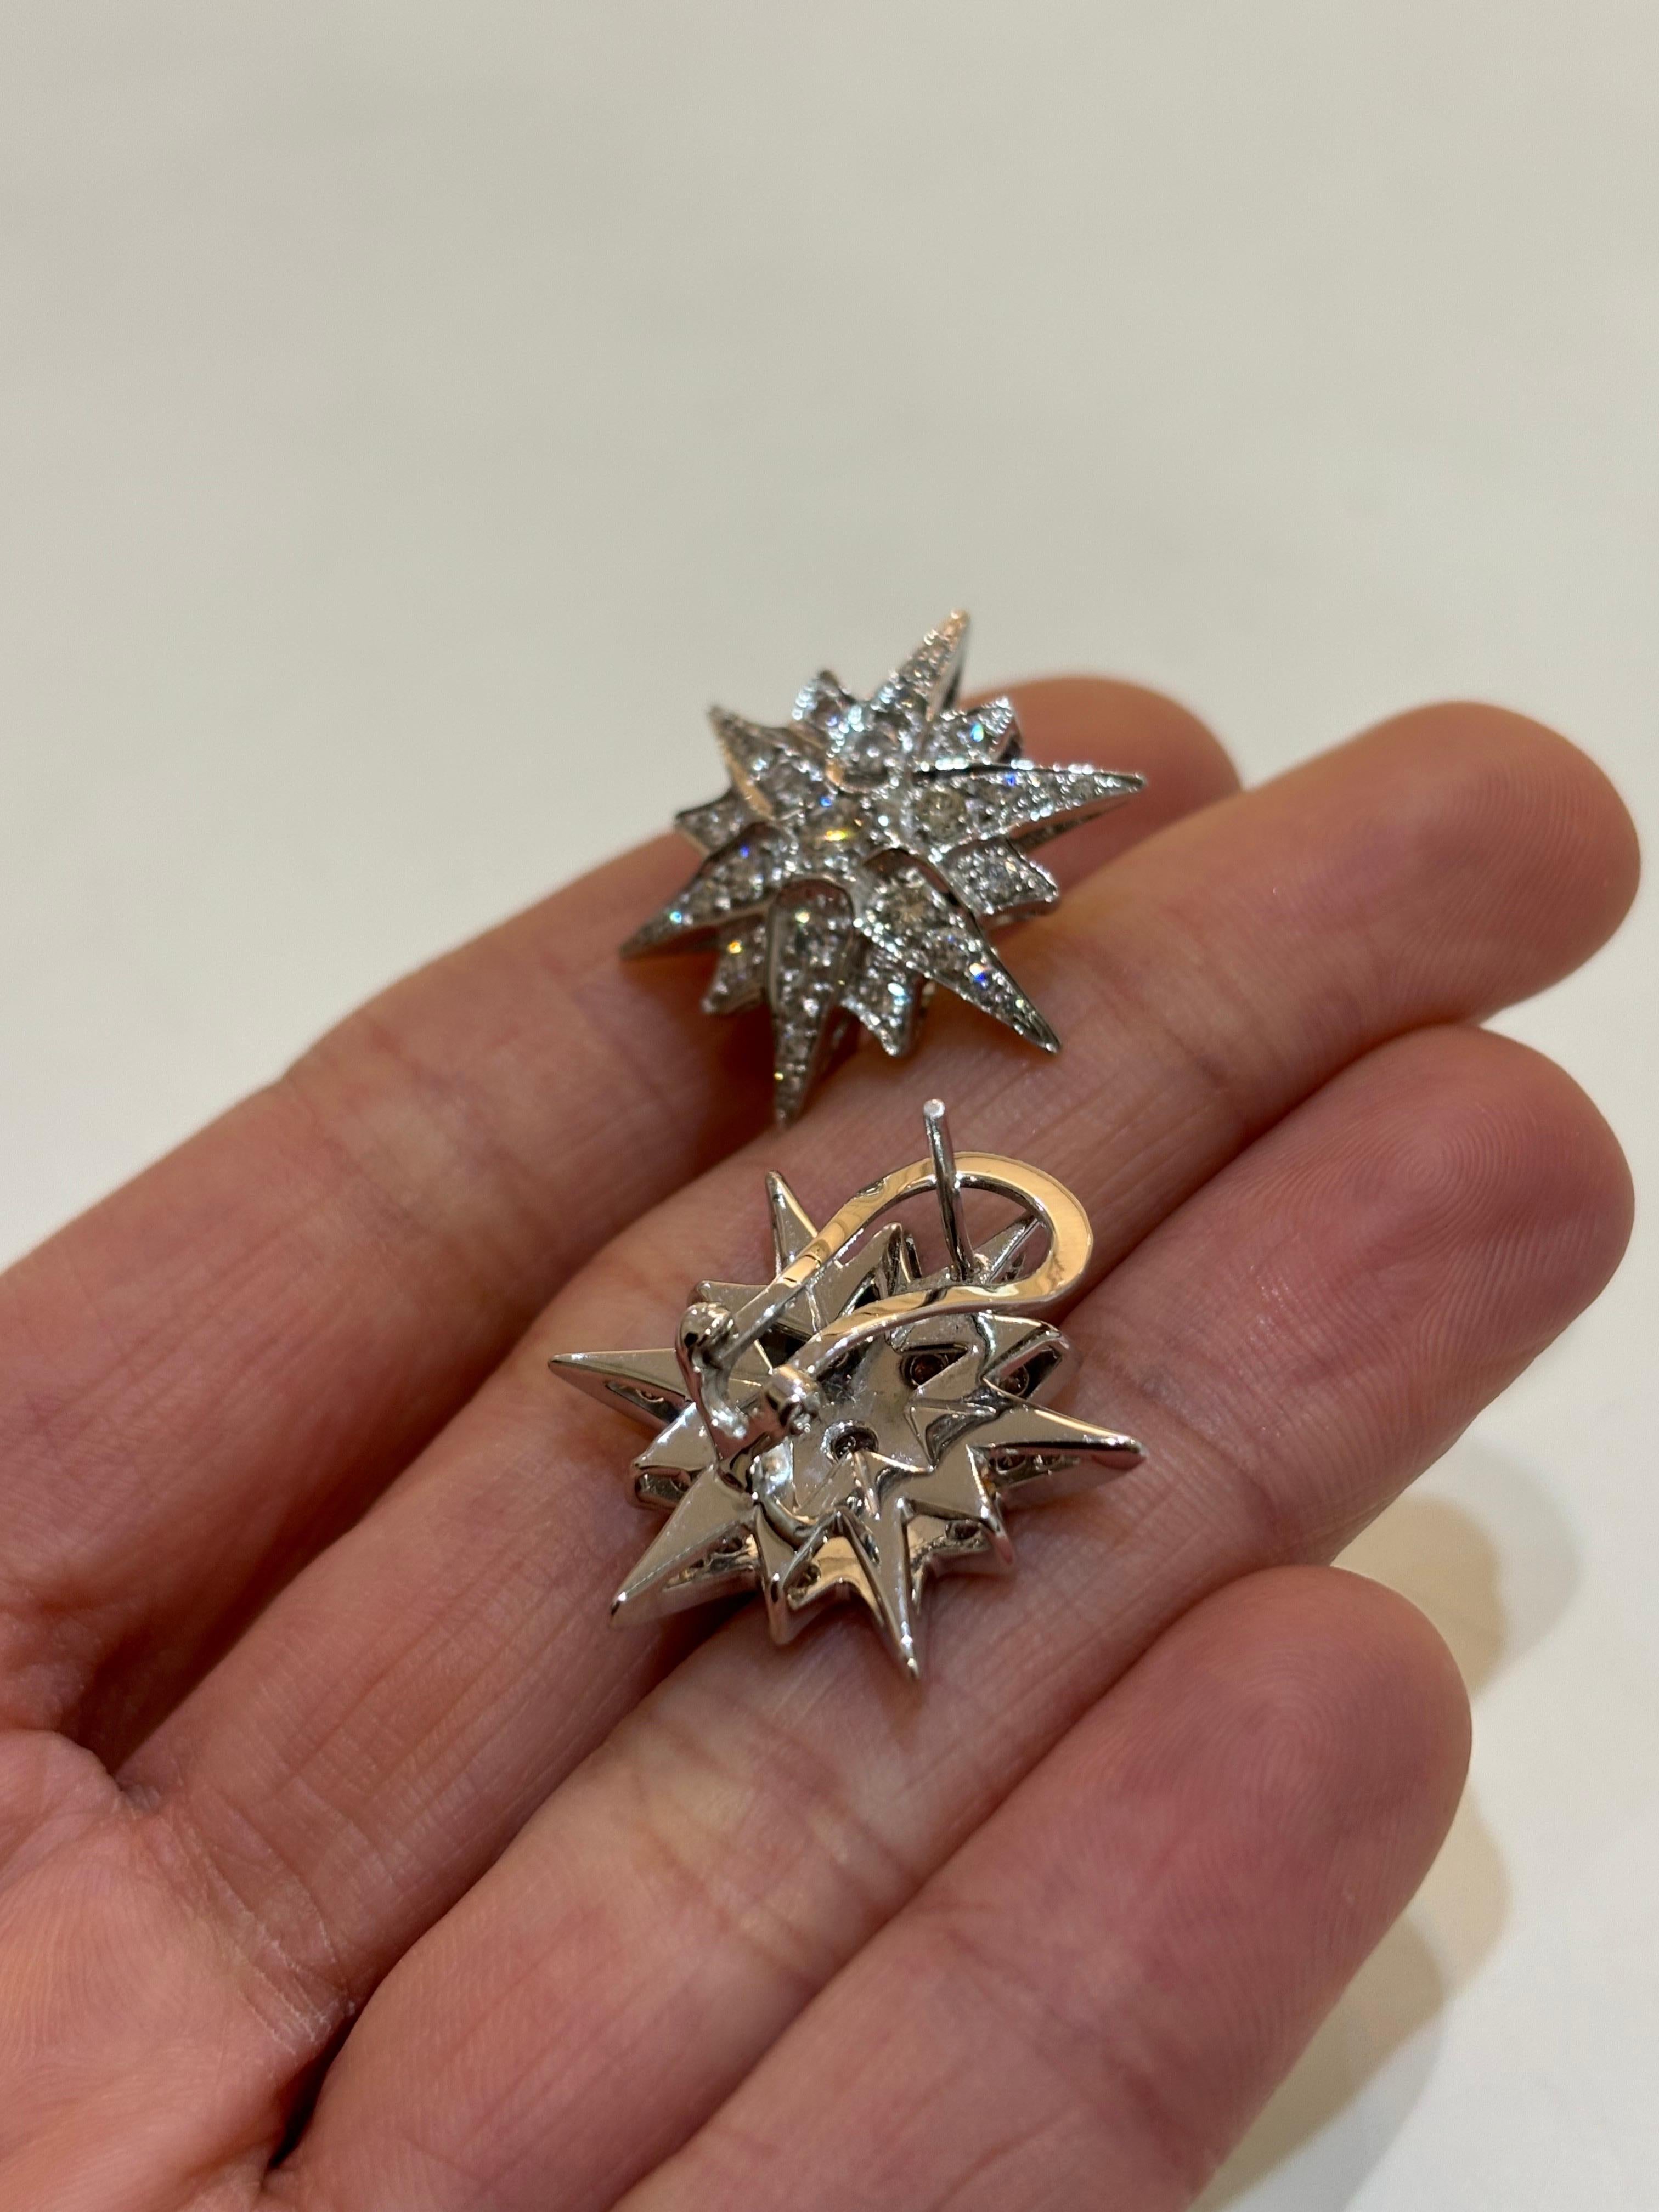 A beautifully handcrafted star shaped 14K Gold and Diamond studs, with a lever backing. A total of 1.5 carats of brilliant cut White Diamonds are used. 
We provide free shipping, and accept returns to our local address in the US. 
Please feel free